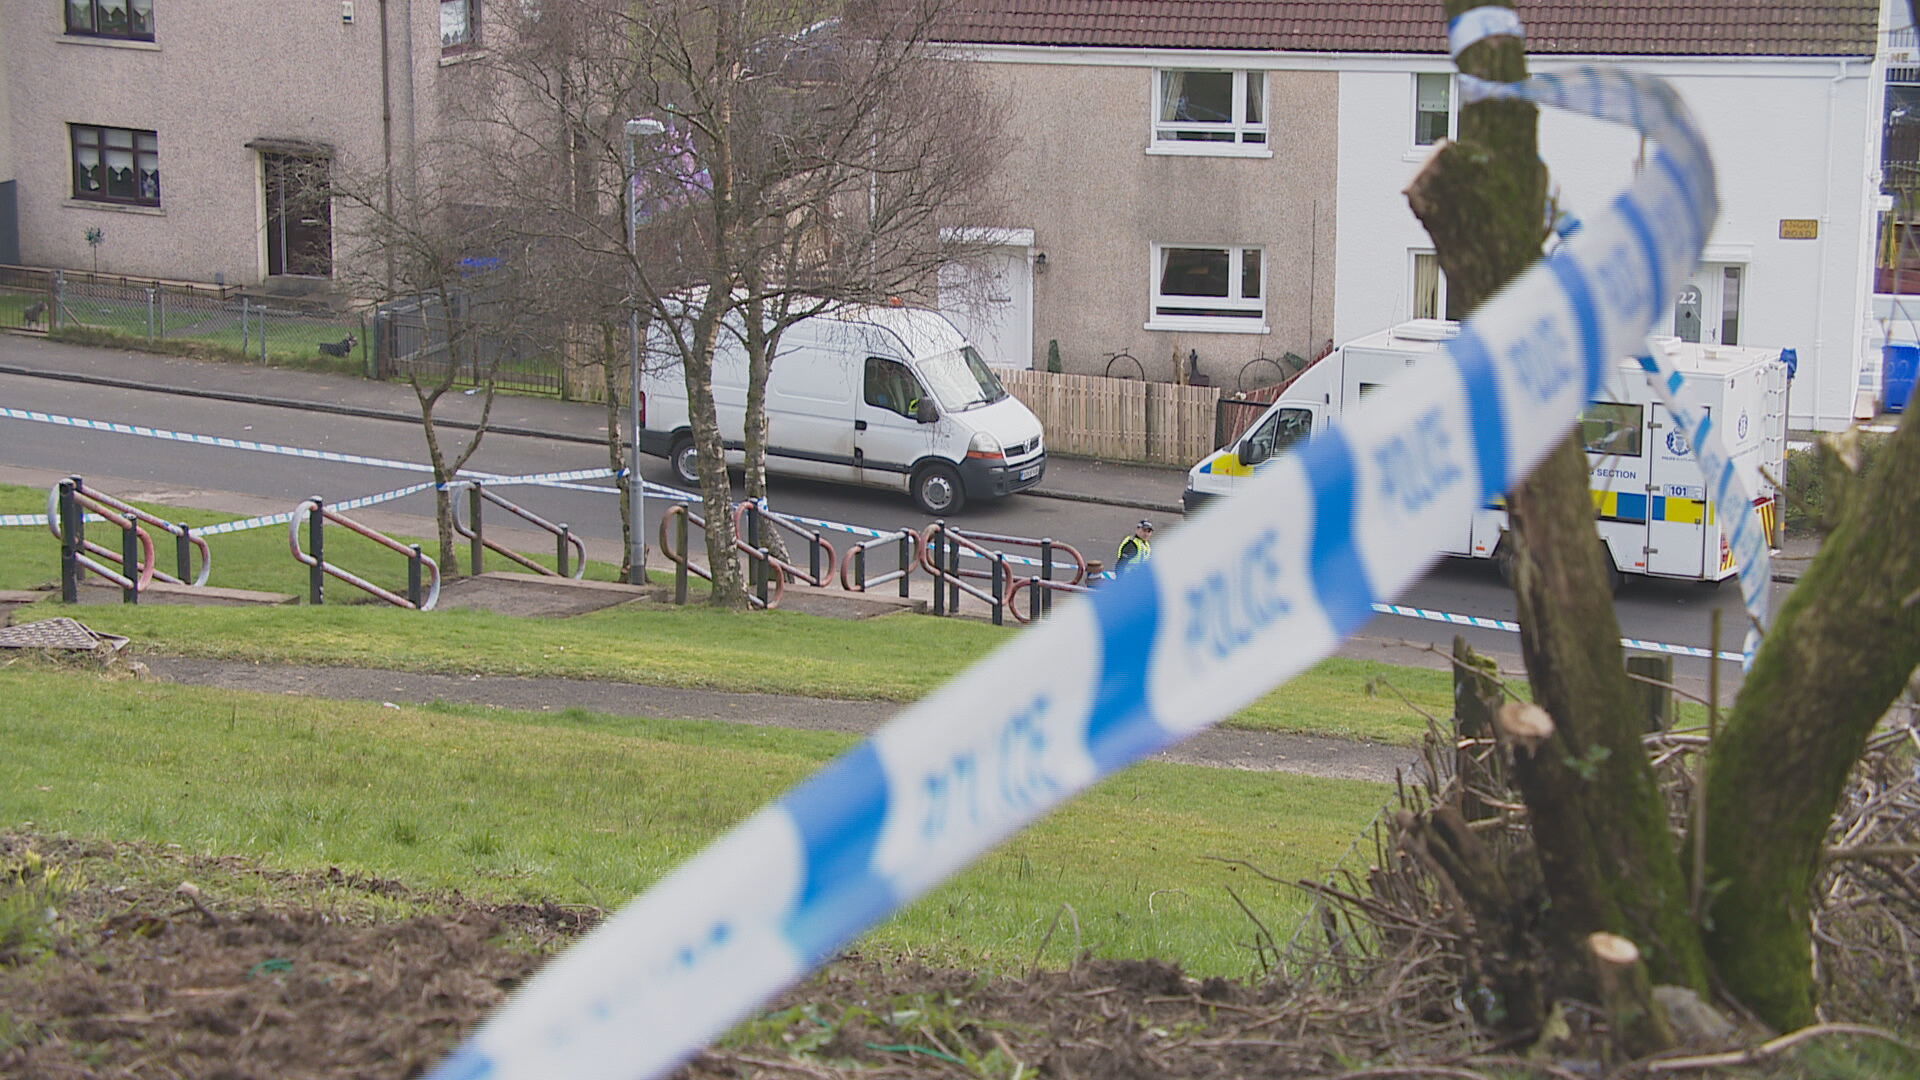 An investigation is under way following the incident on Nairn Road, Larkfield.